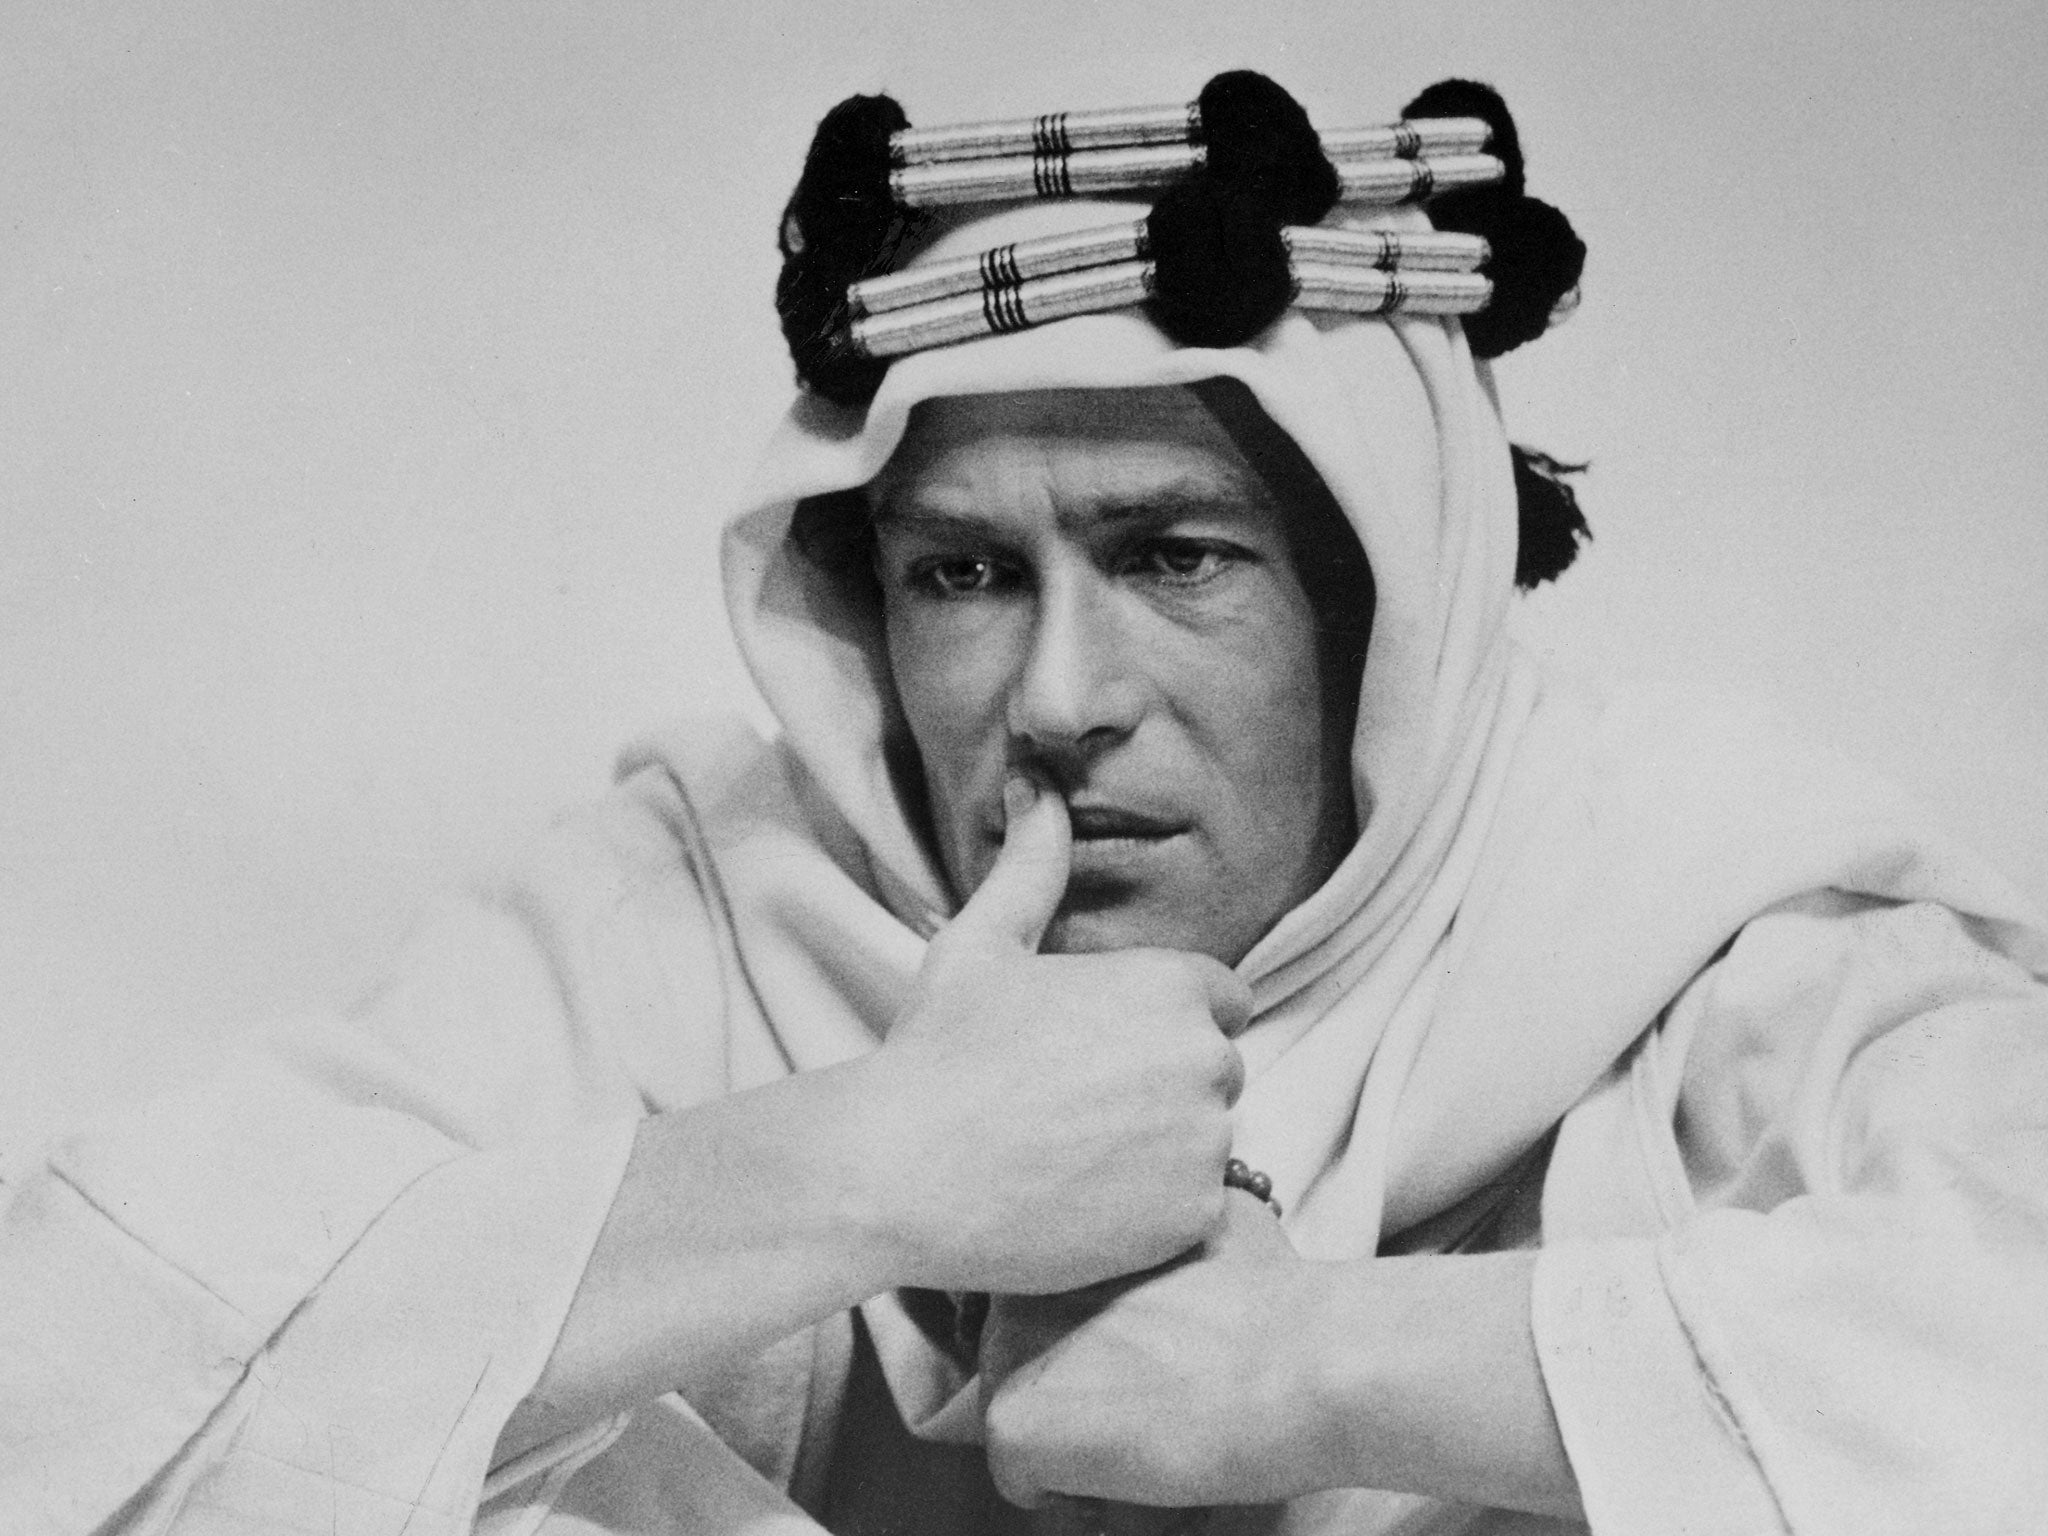 Peter O’Toole in ‘Lawrence of Arabia’